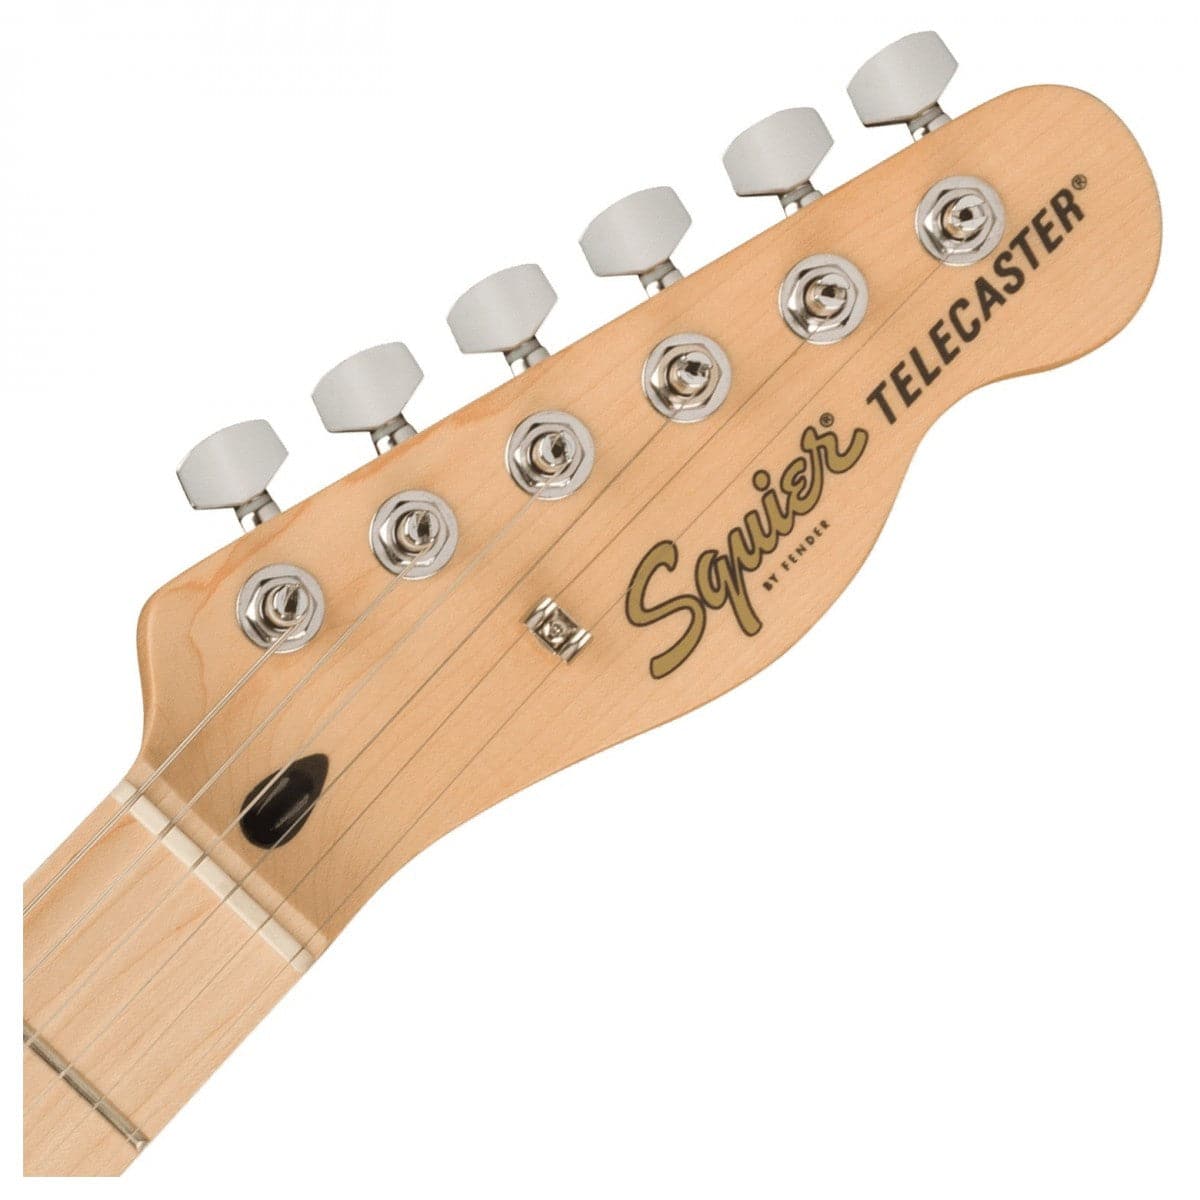 Squier Affinity Telecaster - Butterscotch Blonde